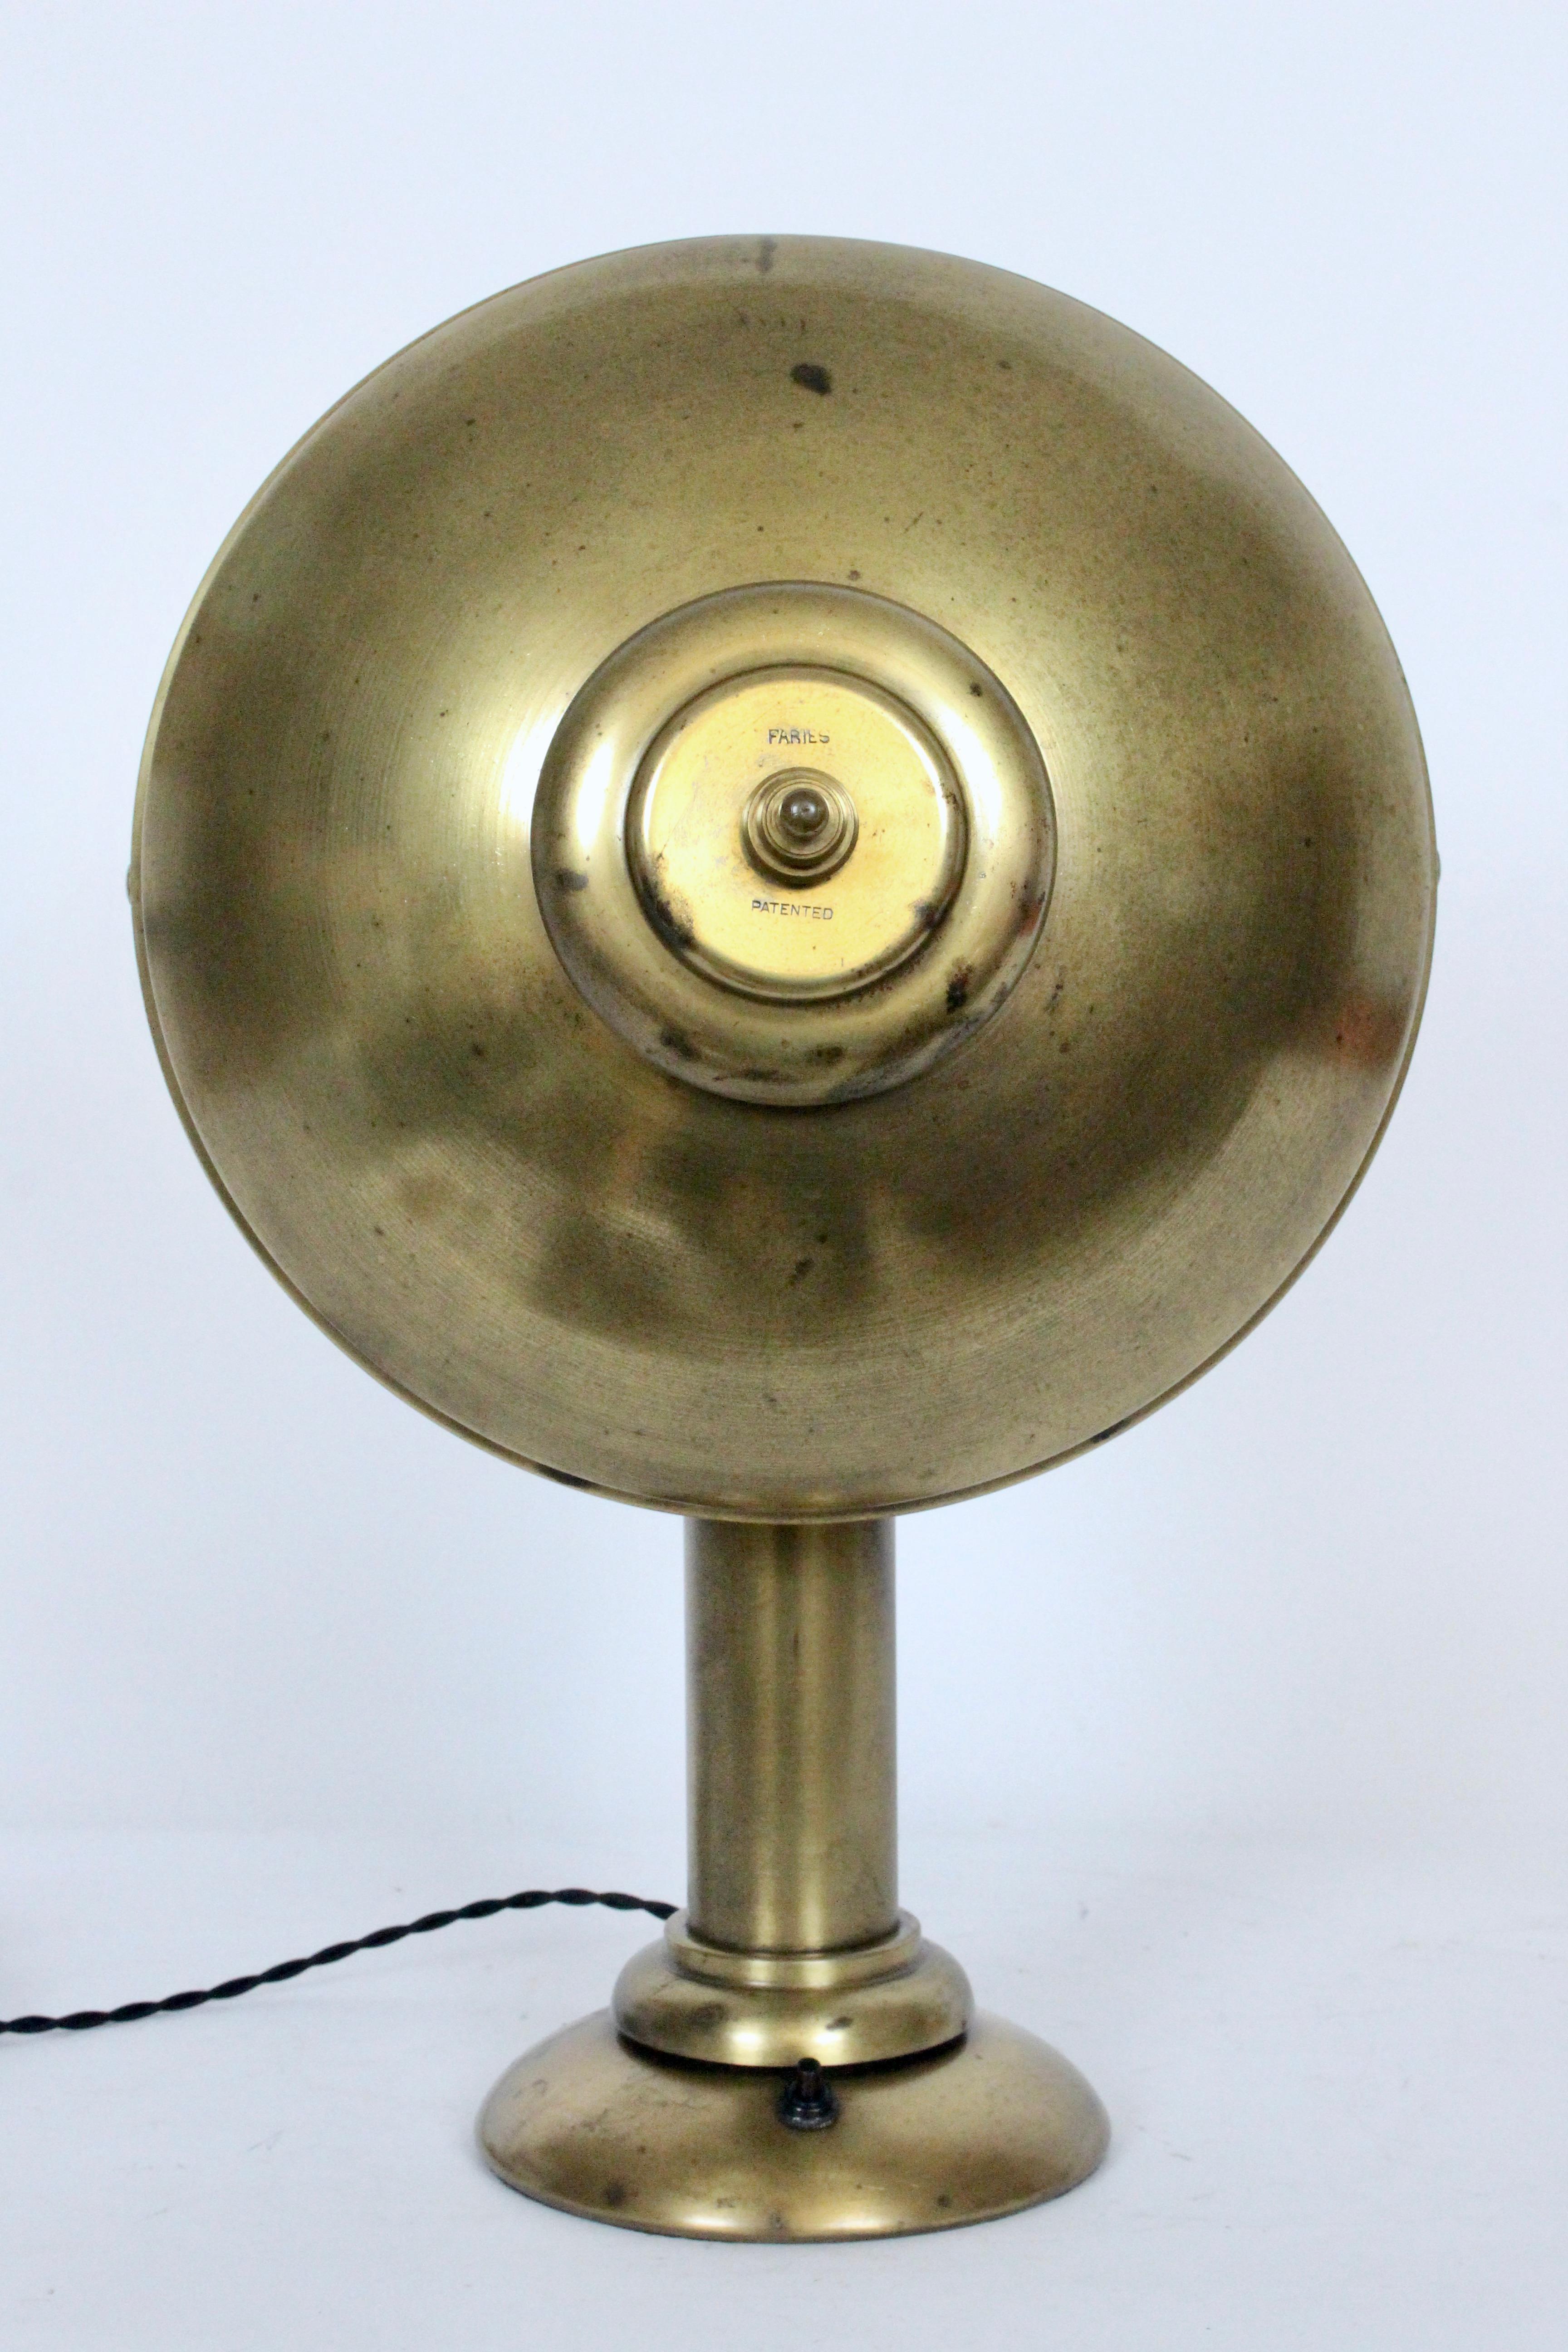 Fairies Mfg. Co. Cantilever All Brass Shaded Desk Lamp, 1920s For Sale 9